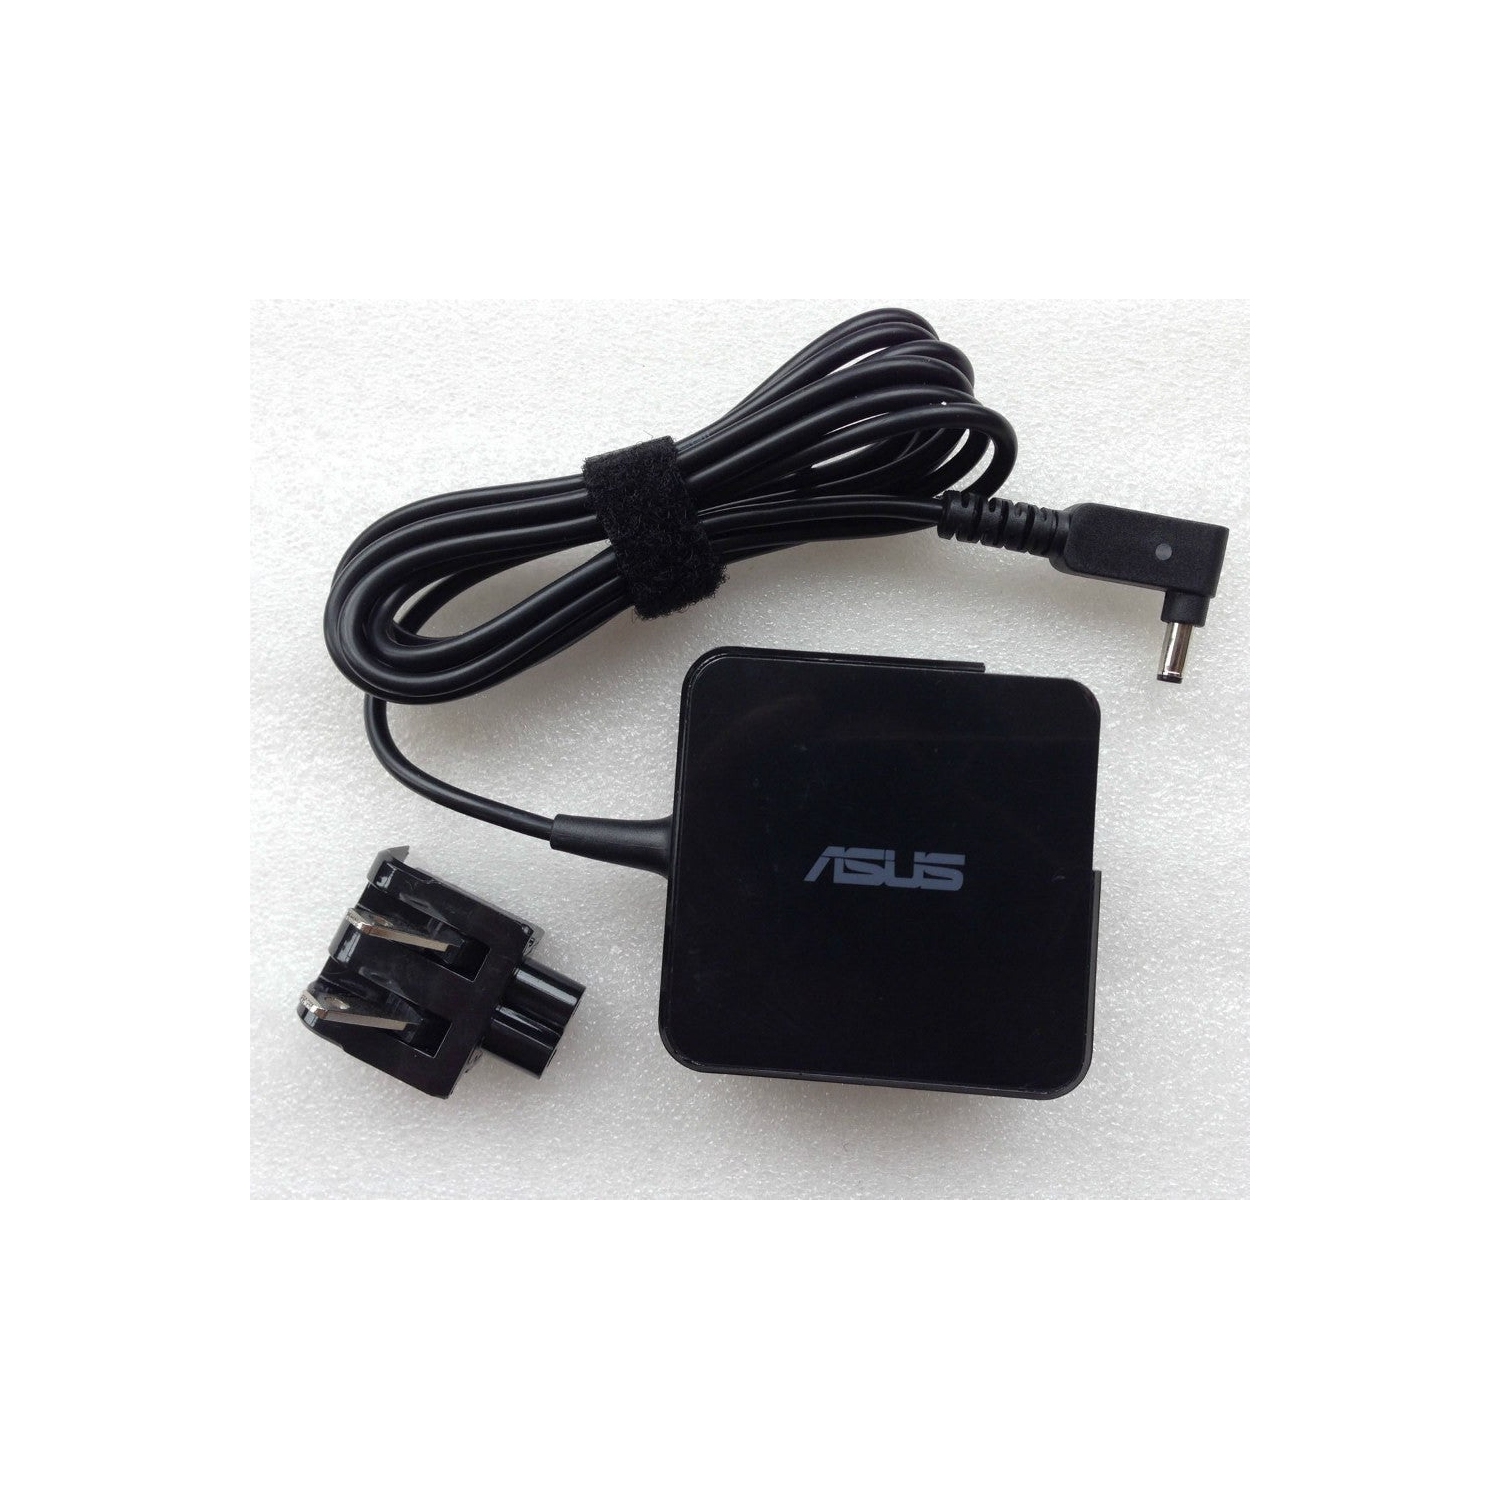 New Genuine Asus Chromebook C300 C300M C300MA C300MA-DH01 AC Adapter Charger 33W